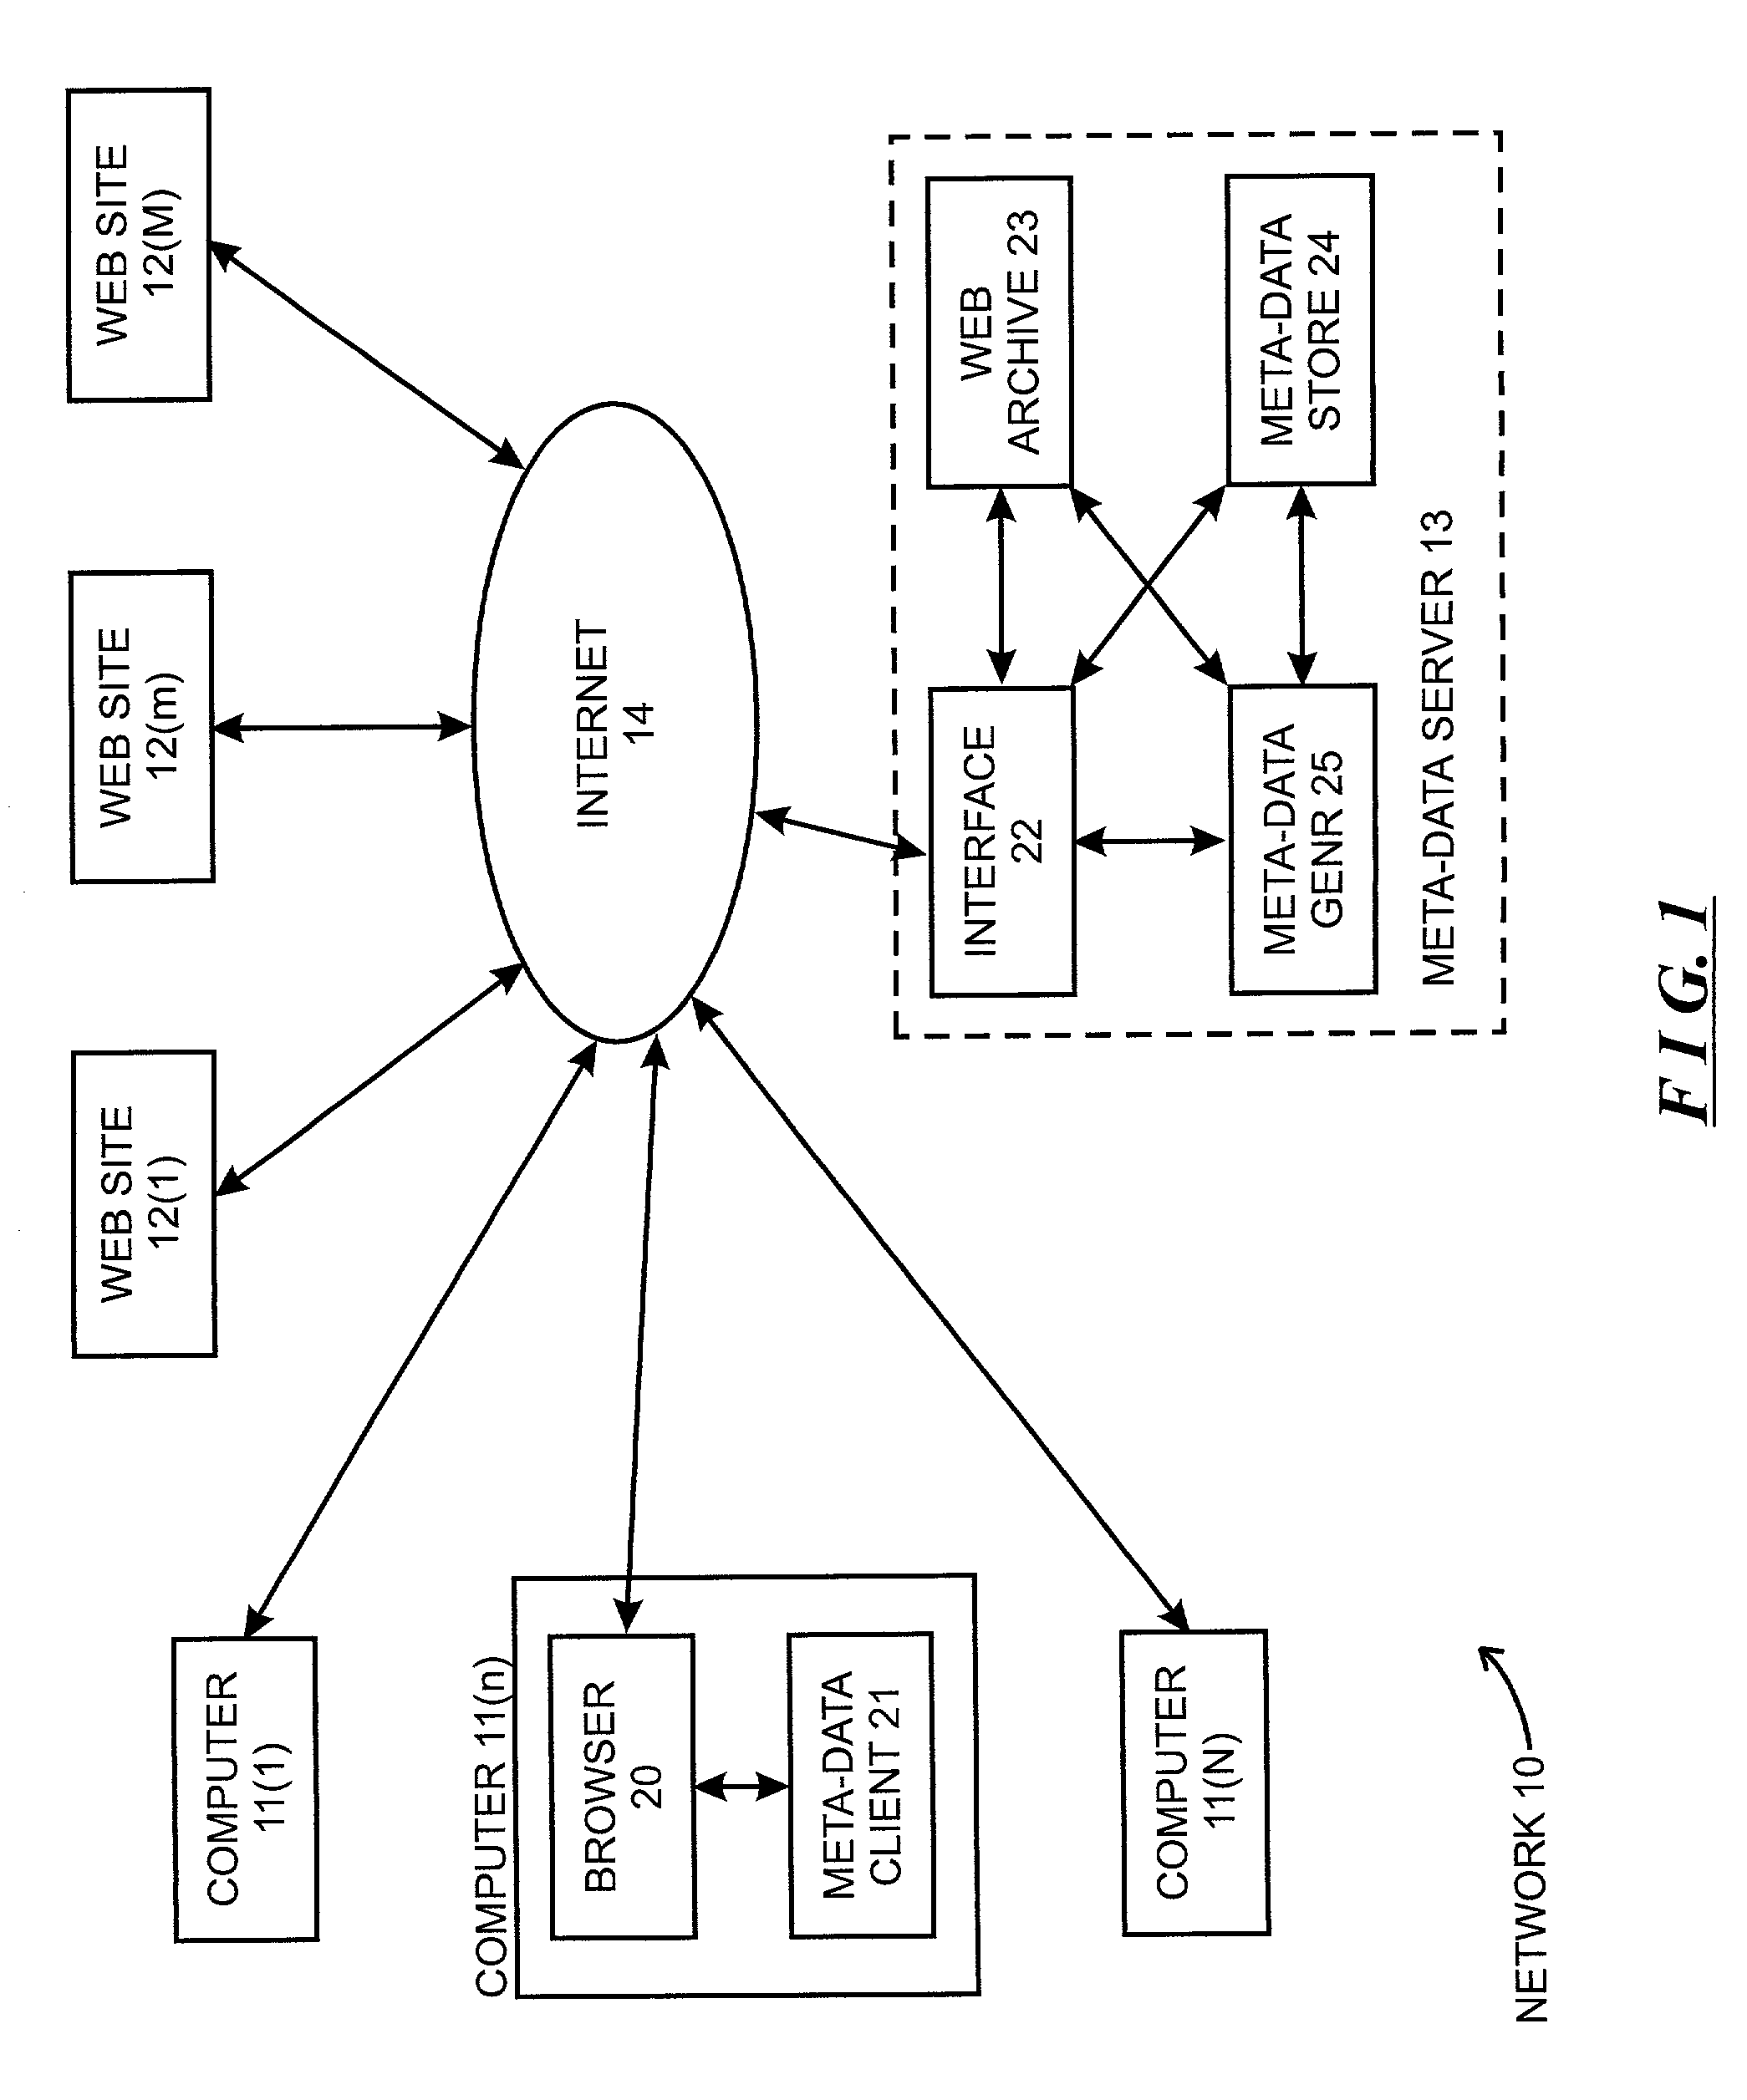 Analysis of search activities of users to identify related network sites